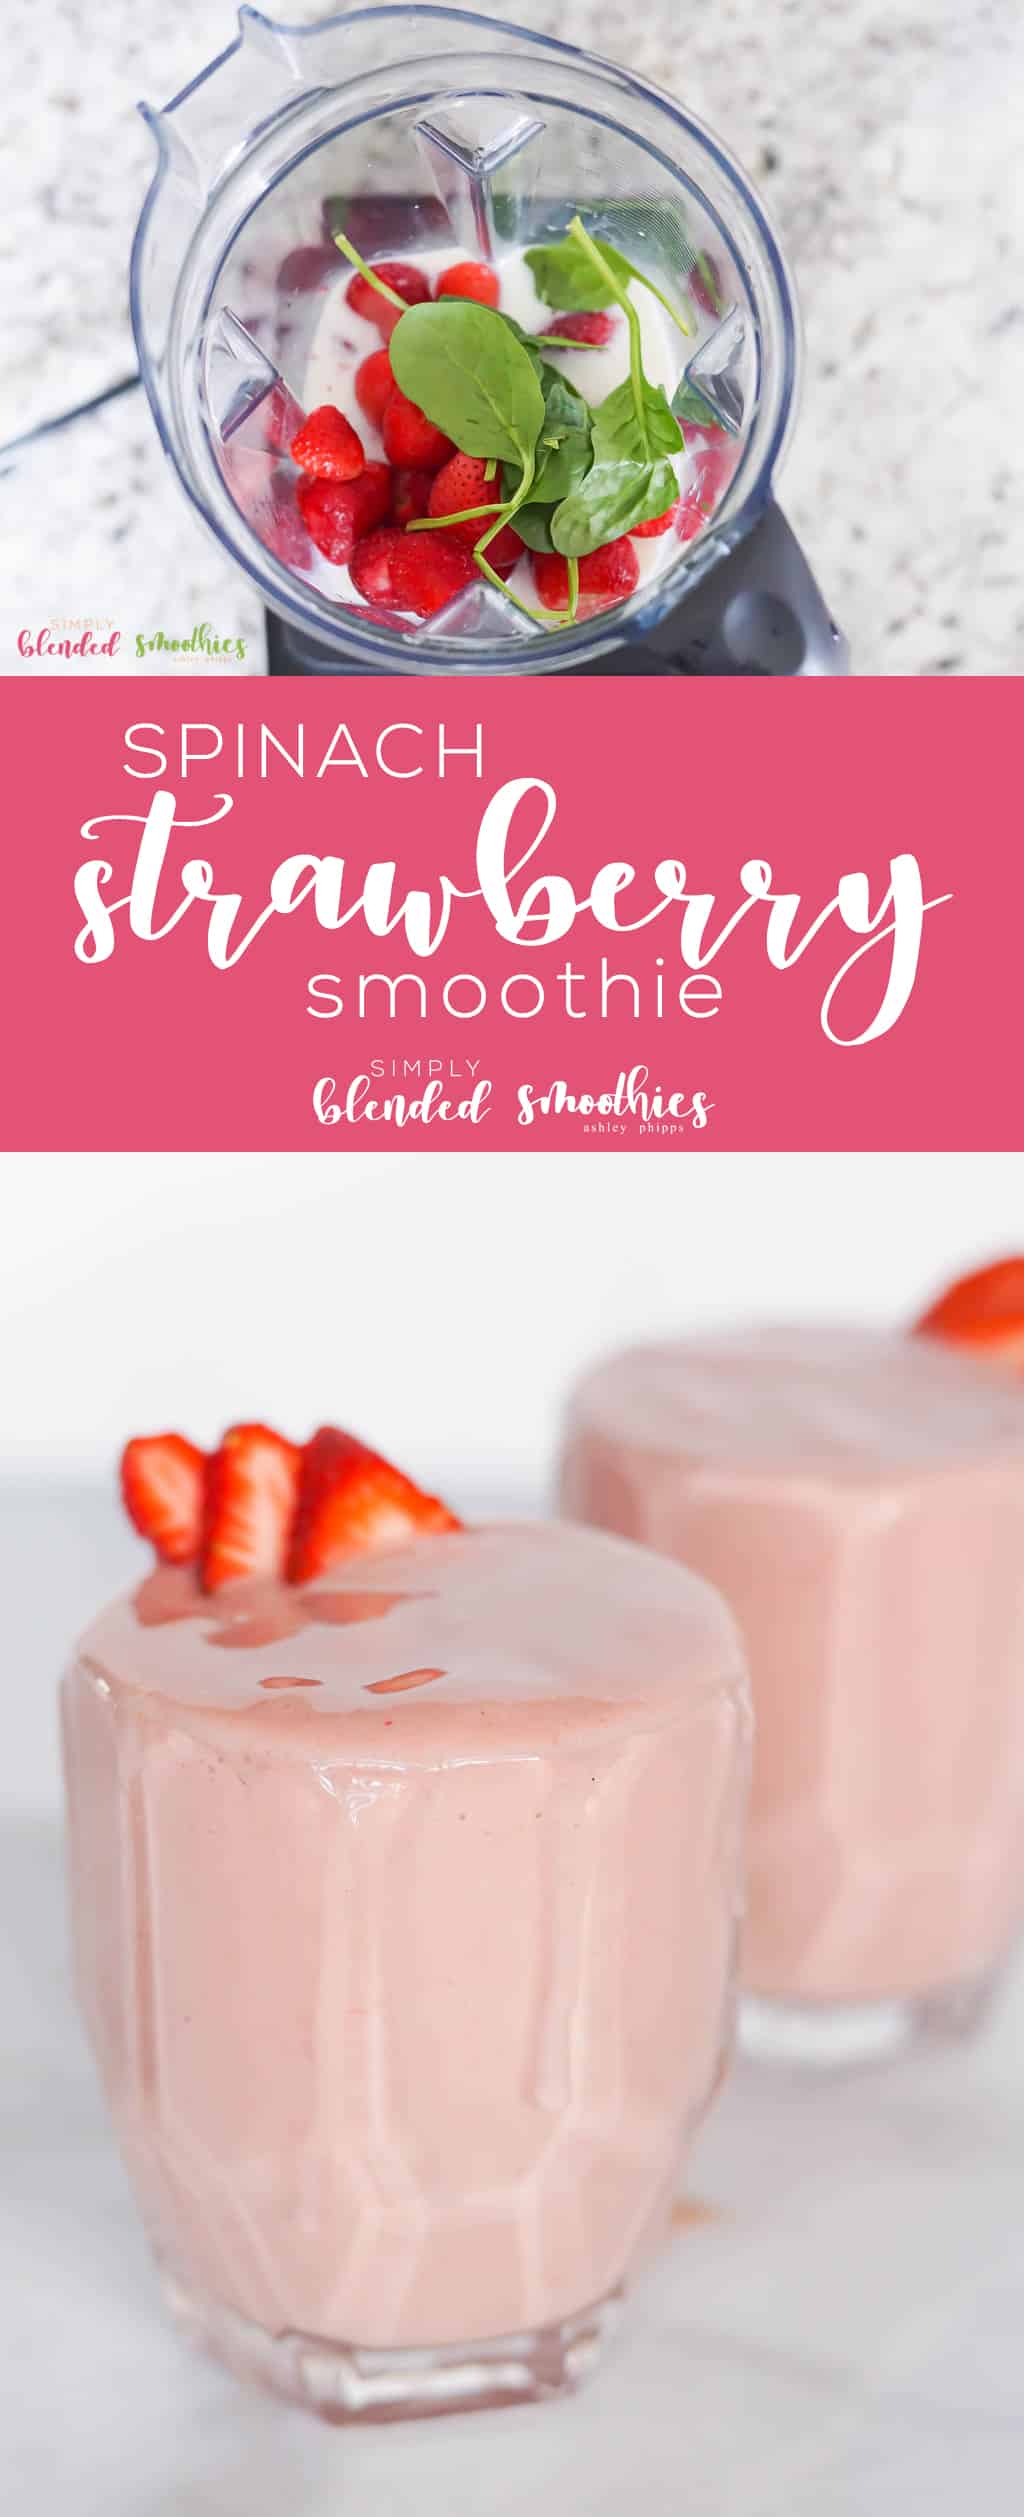 Strawberry Spinach Smoothie - This Delicious Strawberry Spinach Smoothie Is Simple To Make And The Perfect Smoothie For Breakfast Brunch Or An Afternoon Snack